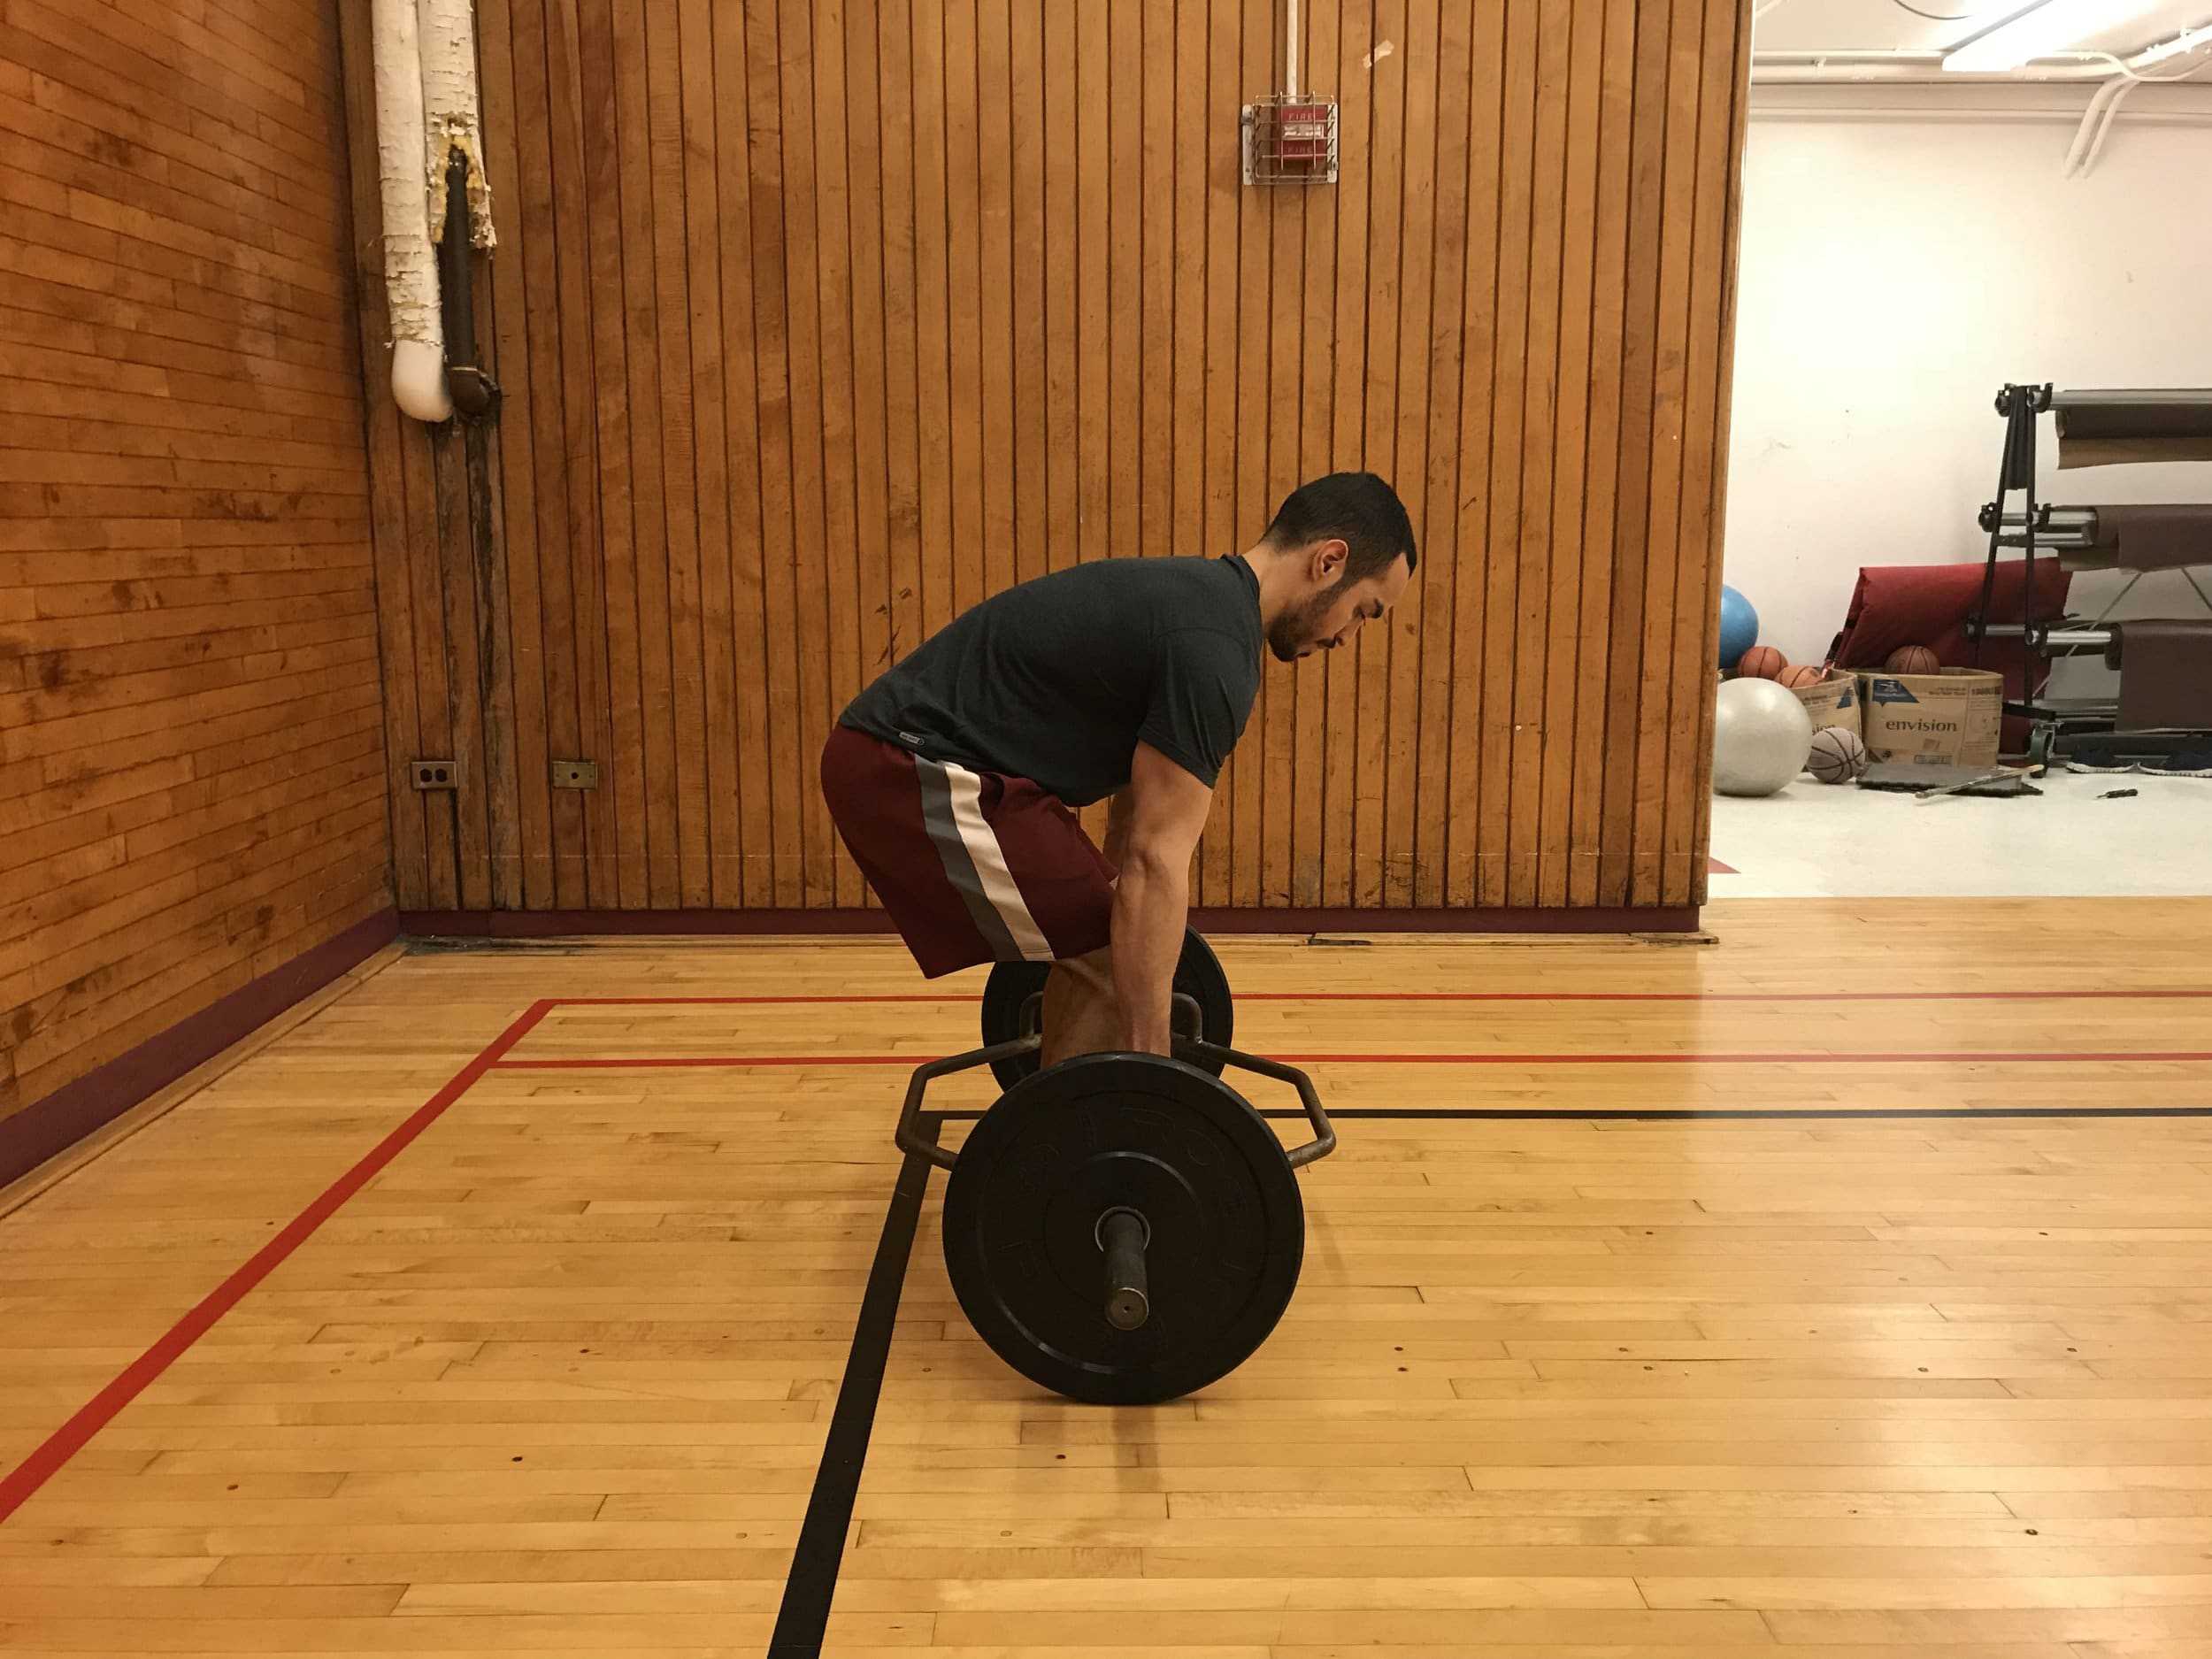 trap bar deadlift bad form with rounded spine